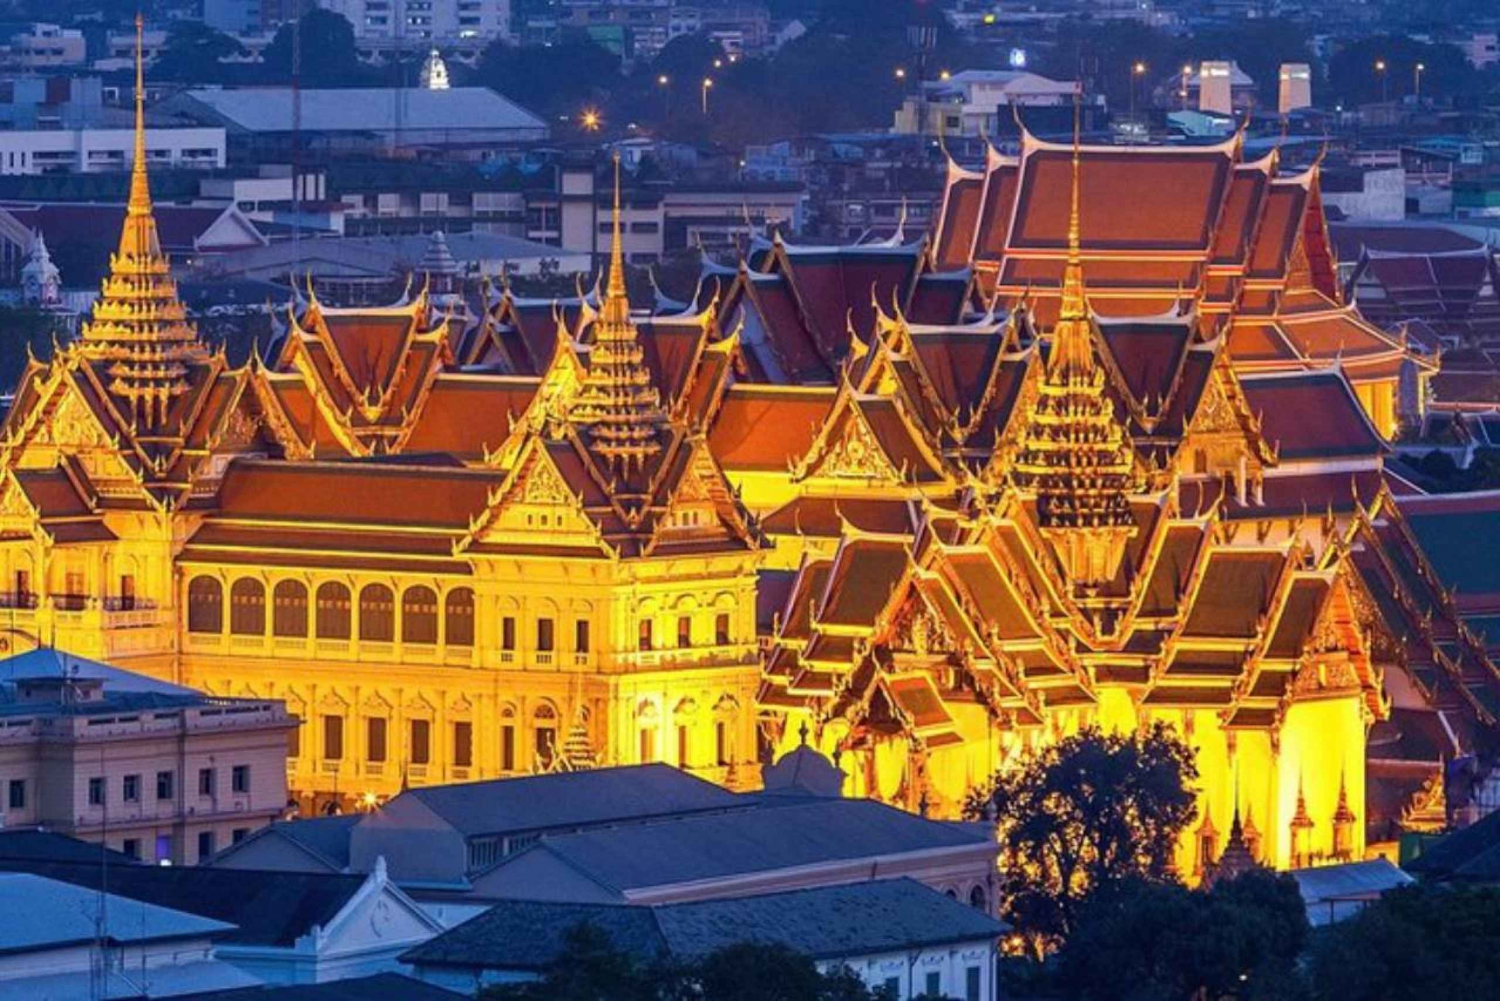 Thailand's Road to Democracy: A Self-Guided Audio Tour